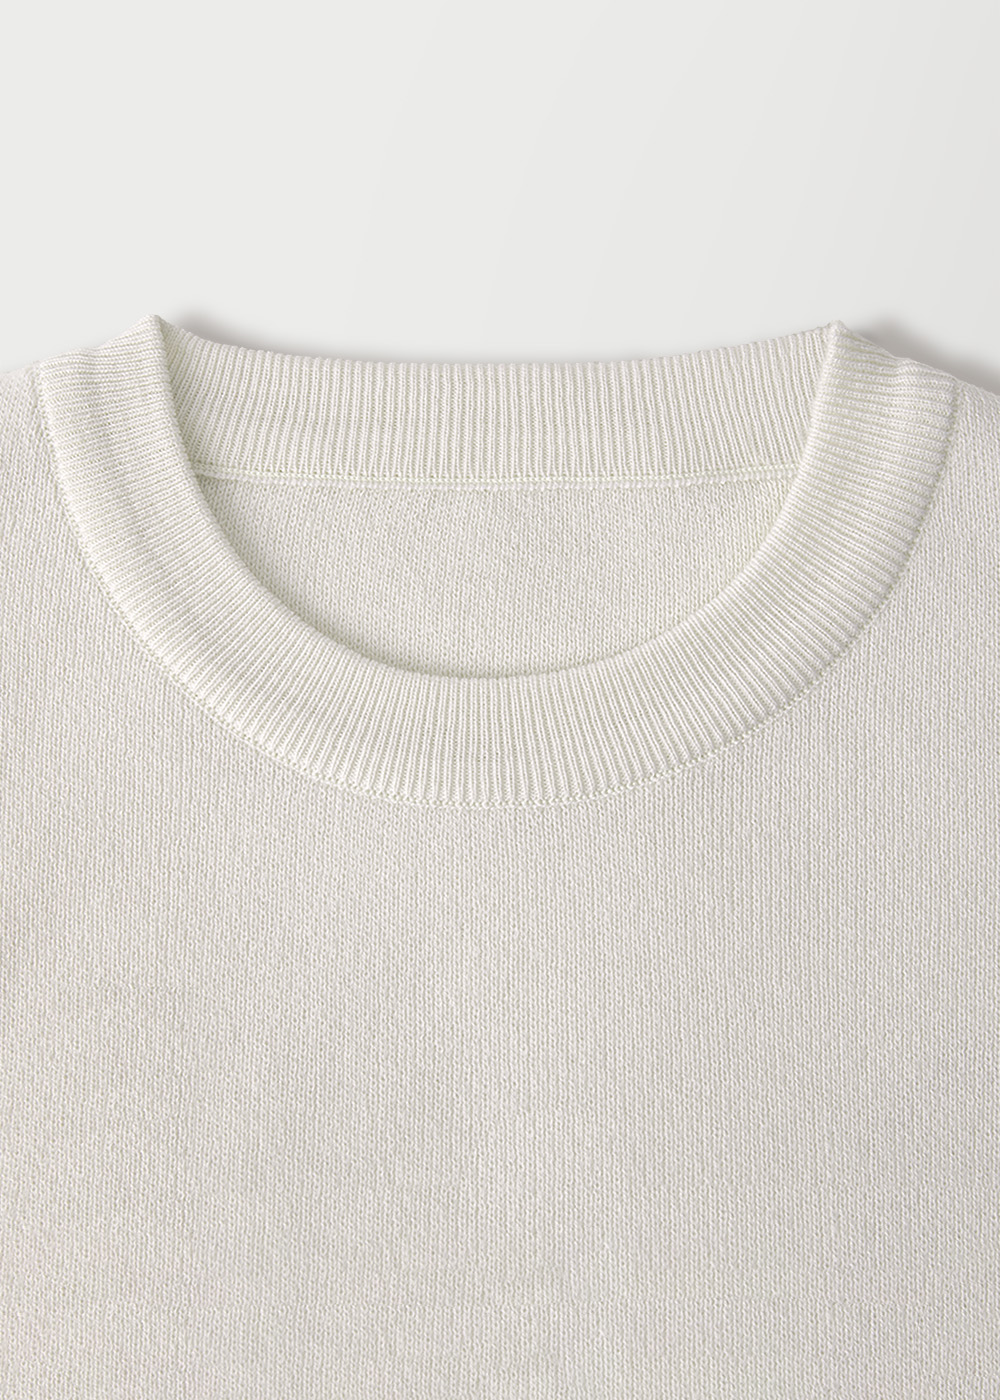 Wool Blended Casual Crewneck Knit _ raw white